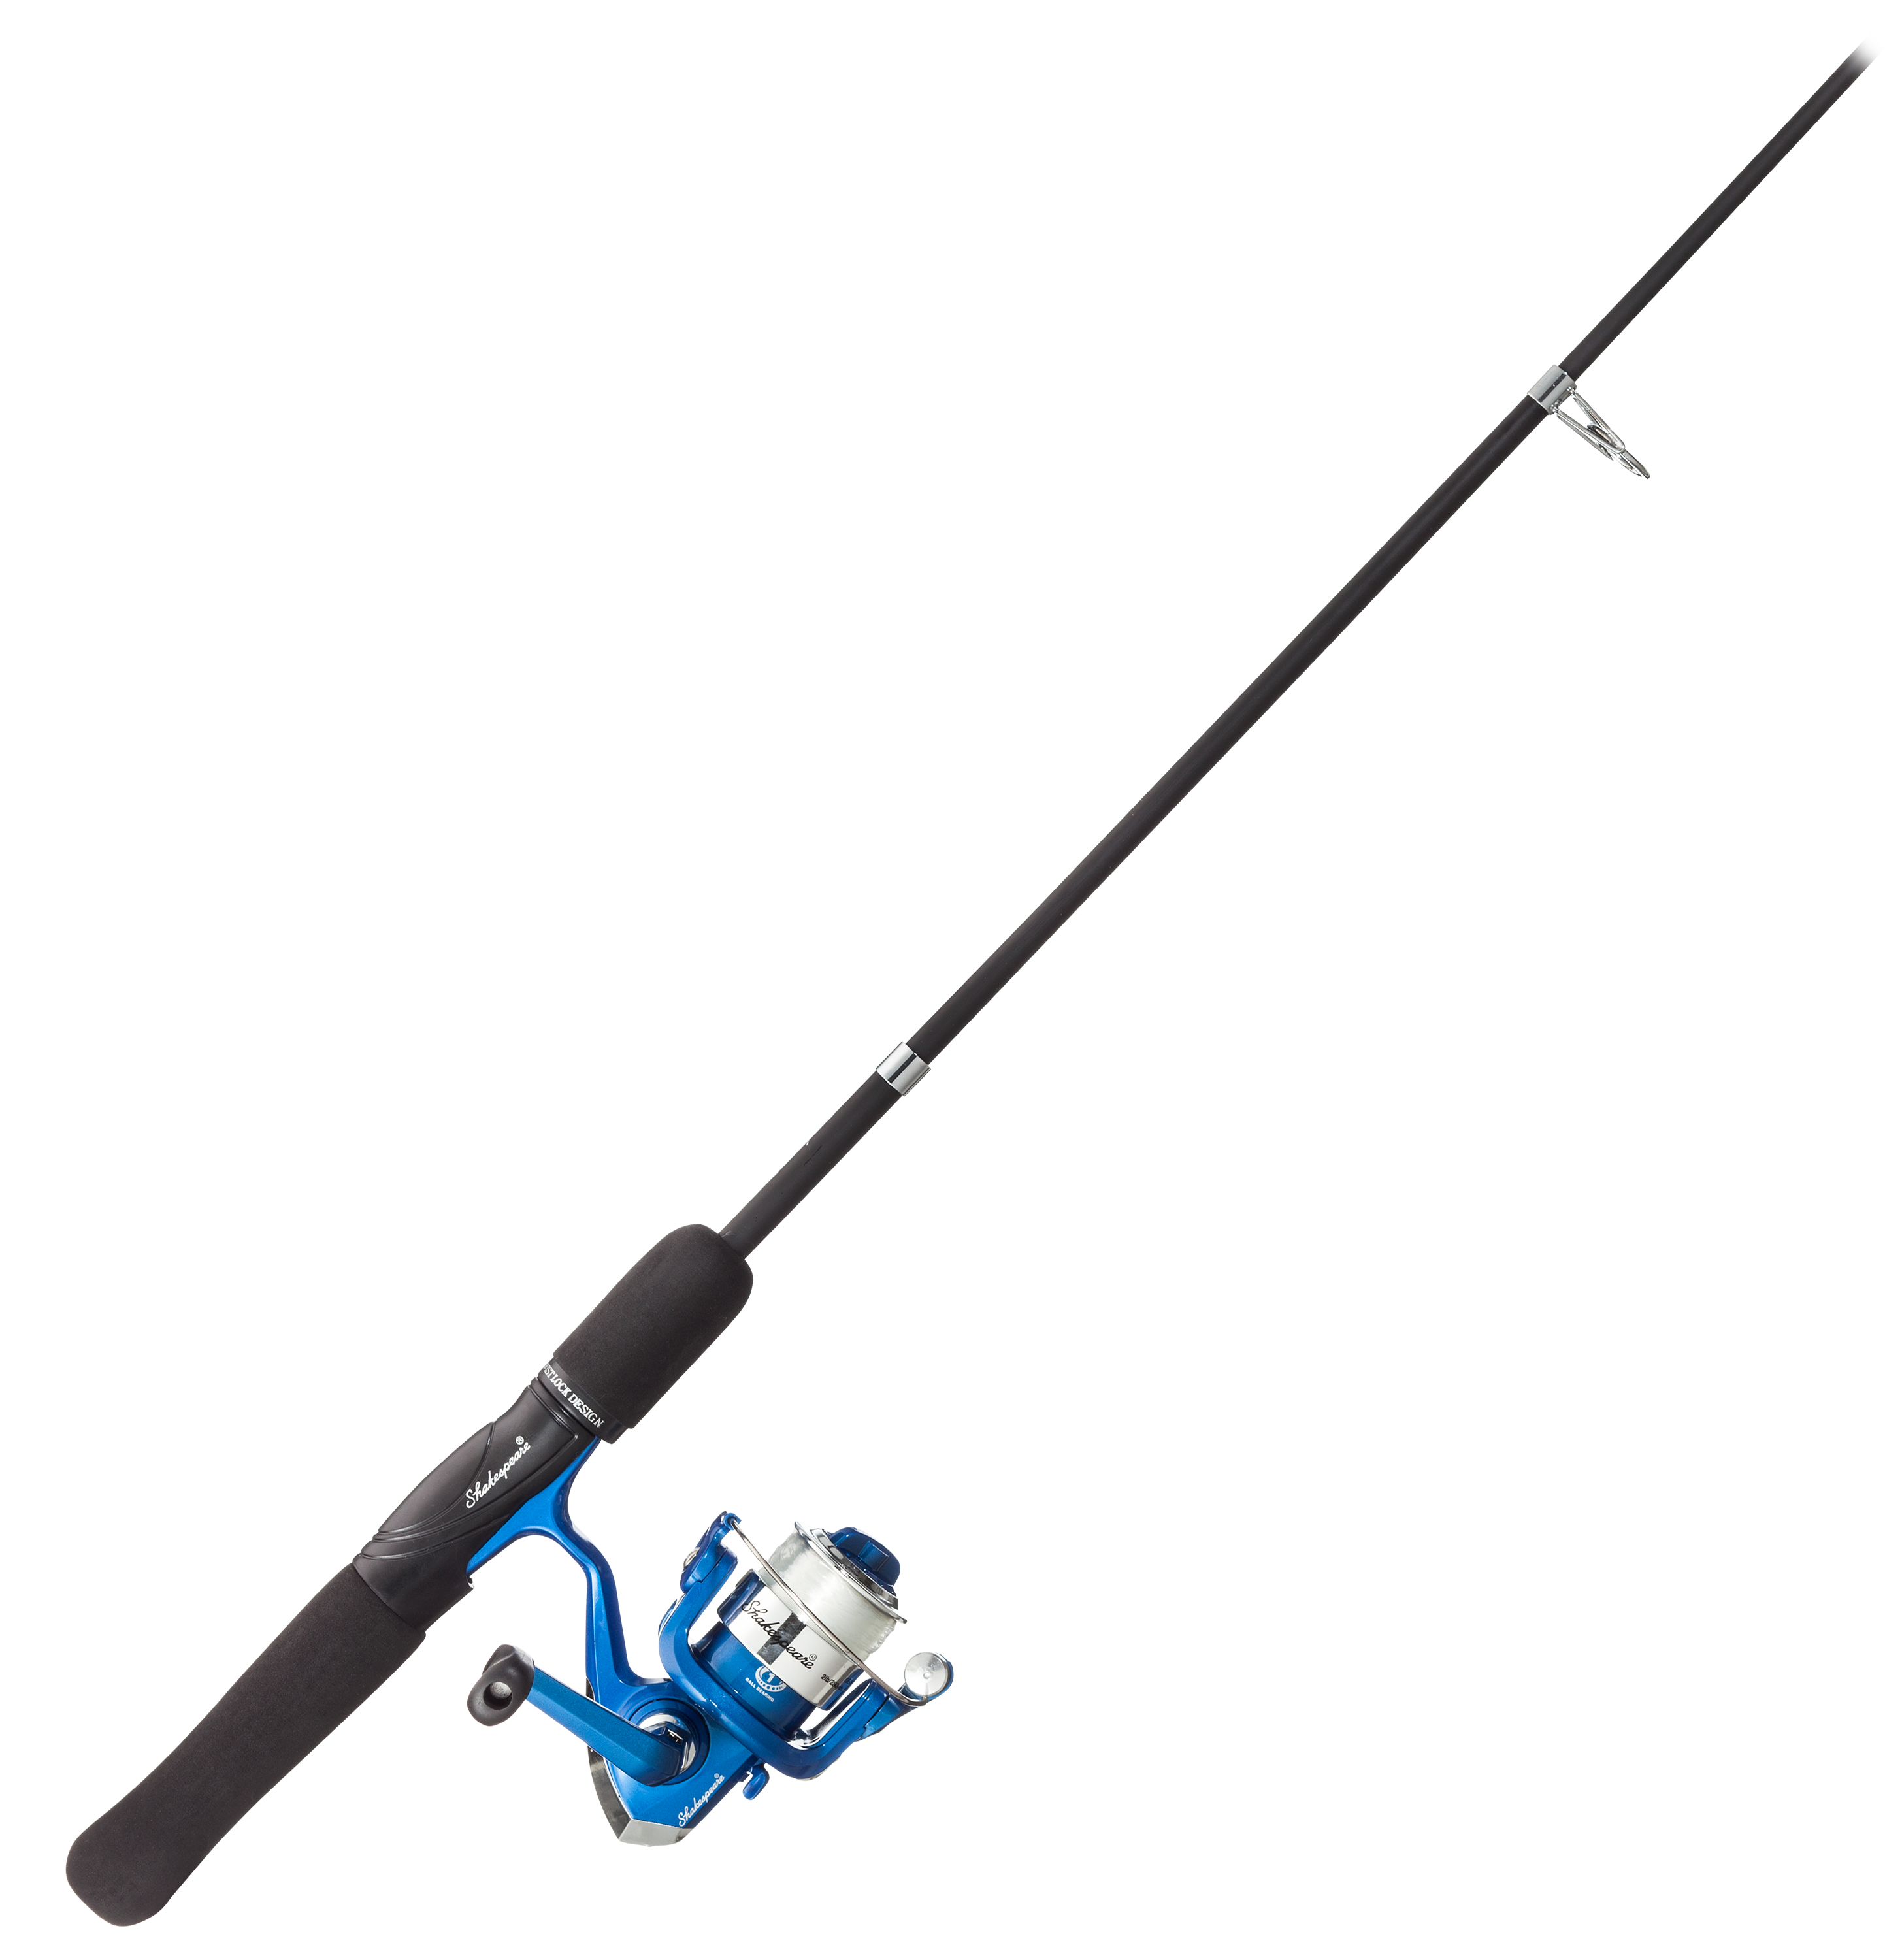 Shakespeare Travel Mate Telescopic Spinning Rod and Reel Combo